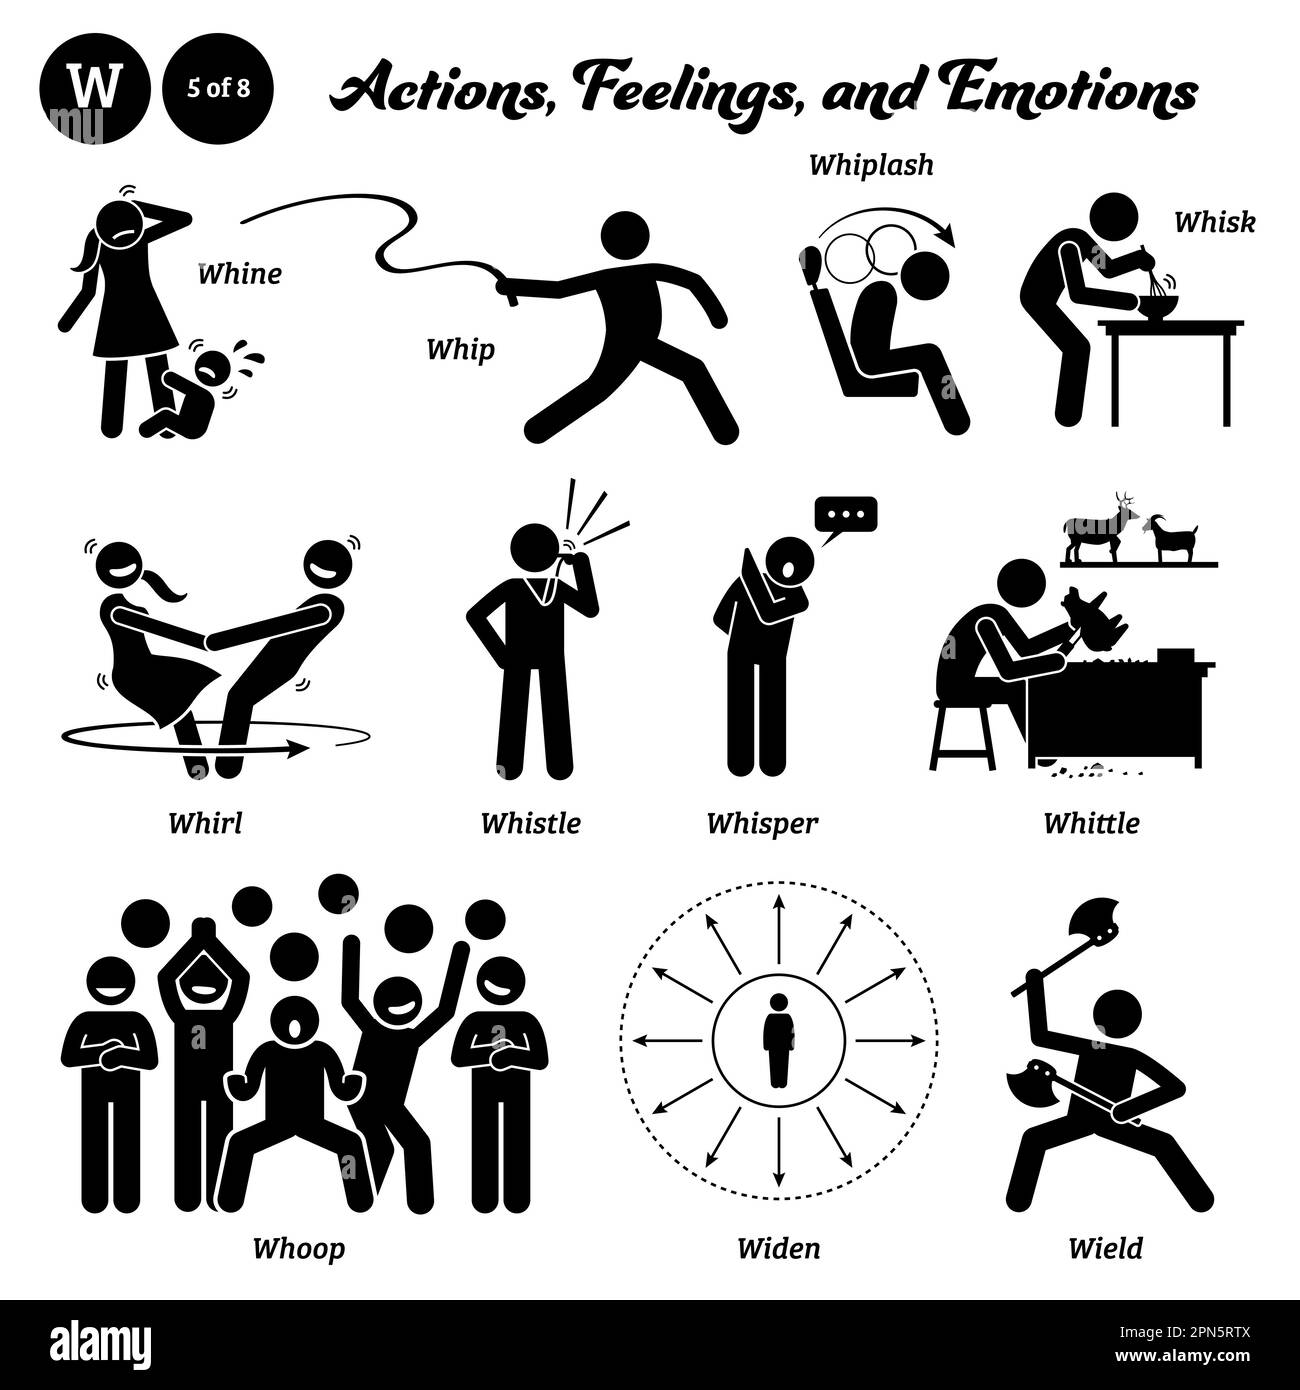 Stick figure human people man action, feelings, and emotions icons alphabet W. Whine, whip, whiplash, whisk, whirl, whistle, whisper, whittle, whoop, Stock Vector